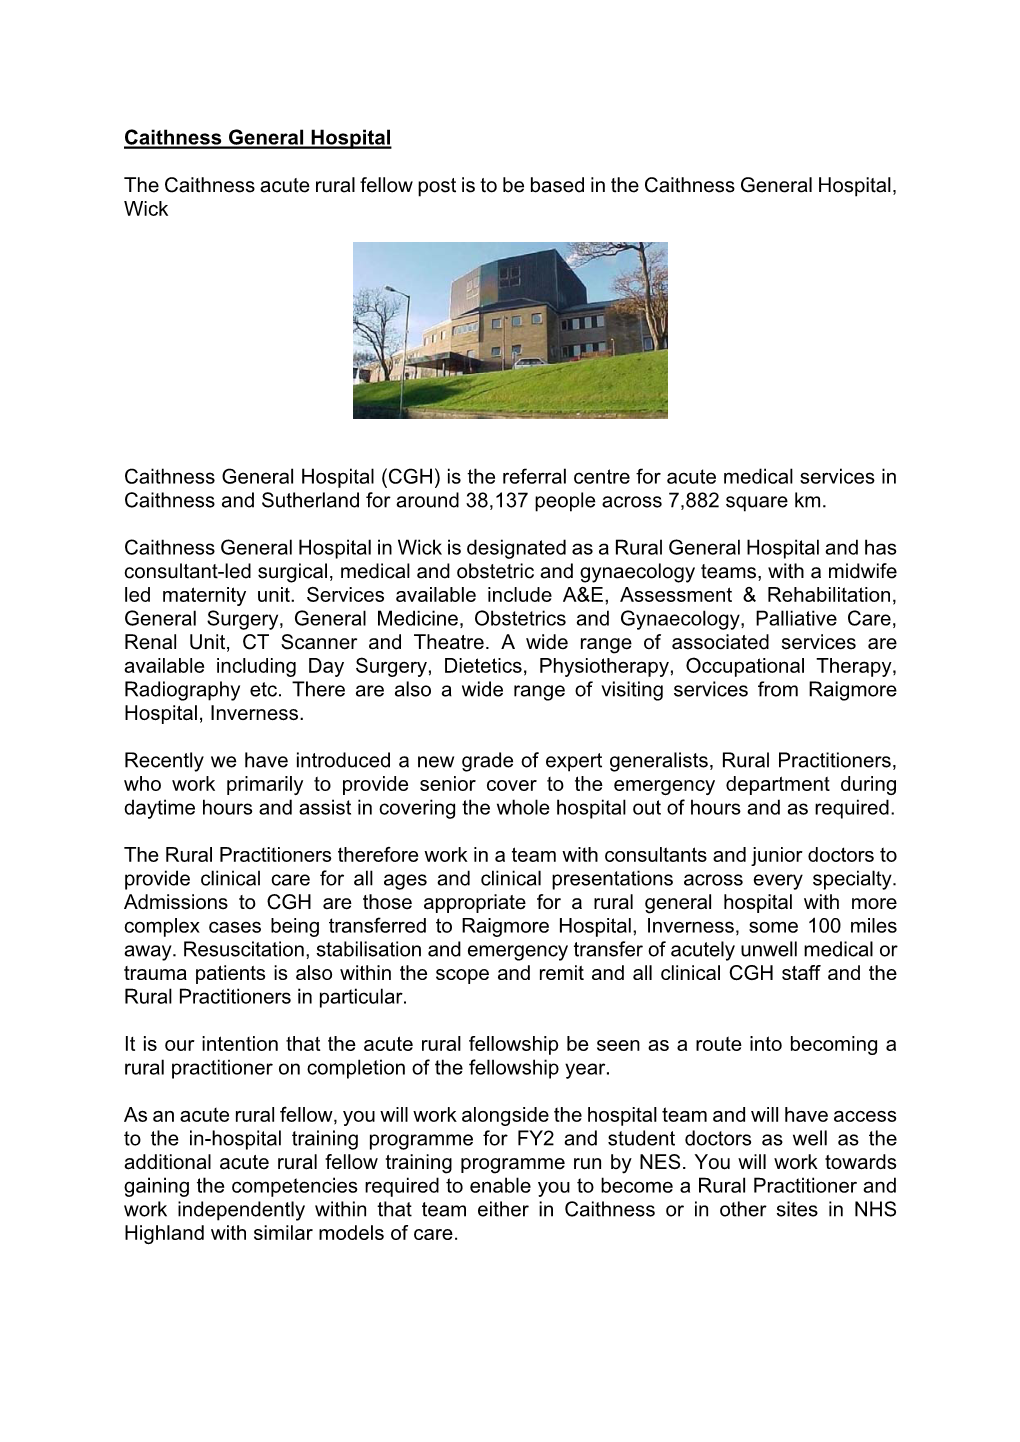 Caithness General Hospital the Caithness Acute Rural Fellow Post Is